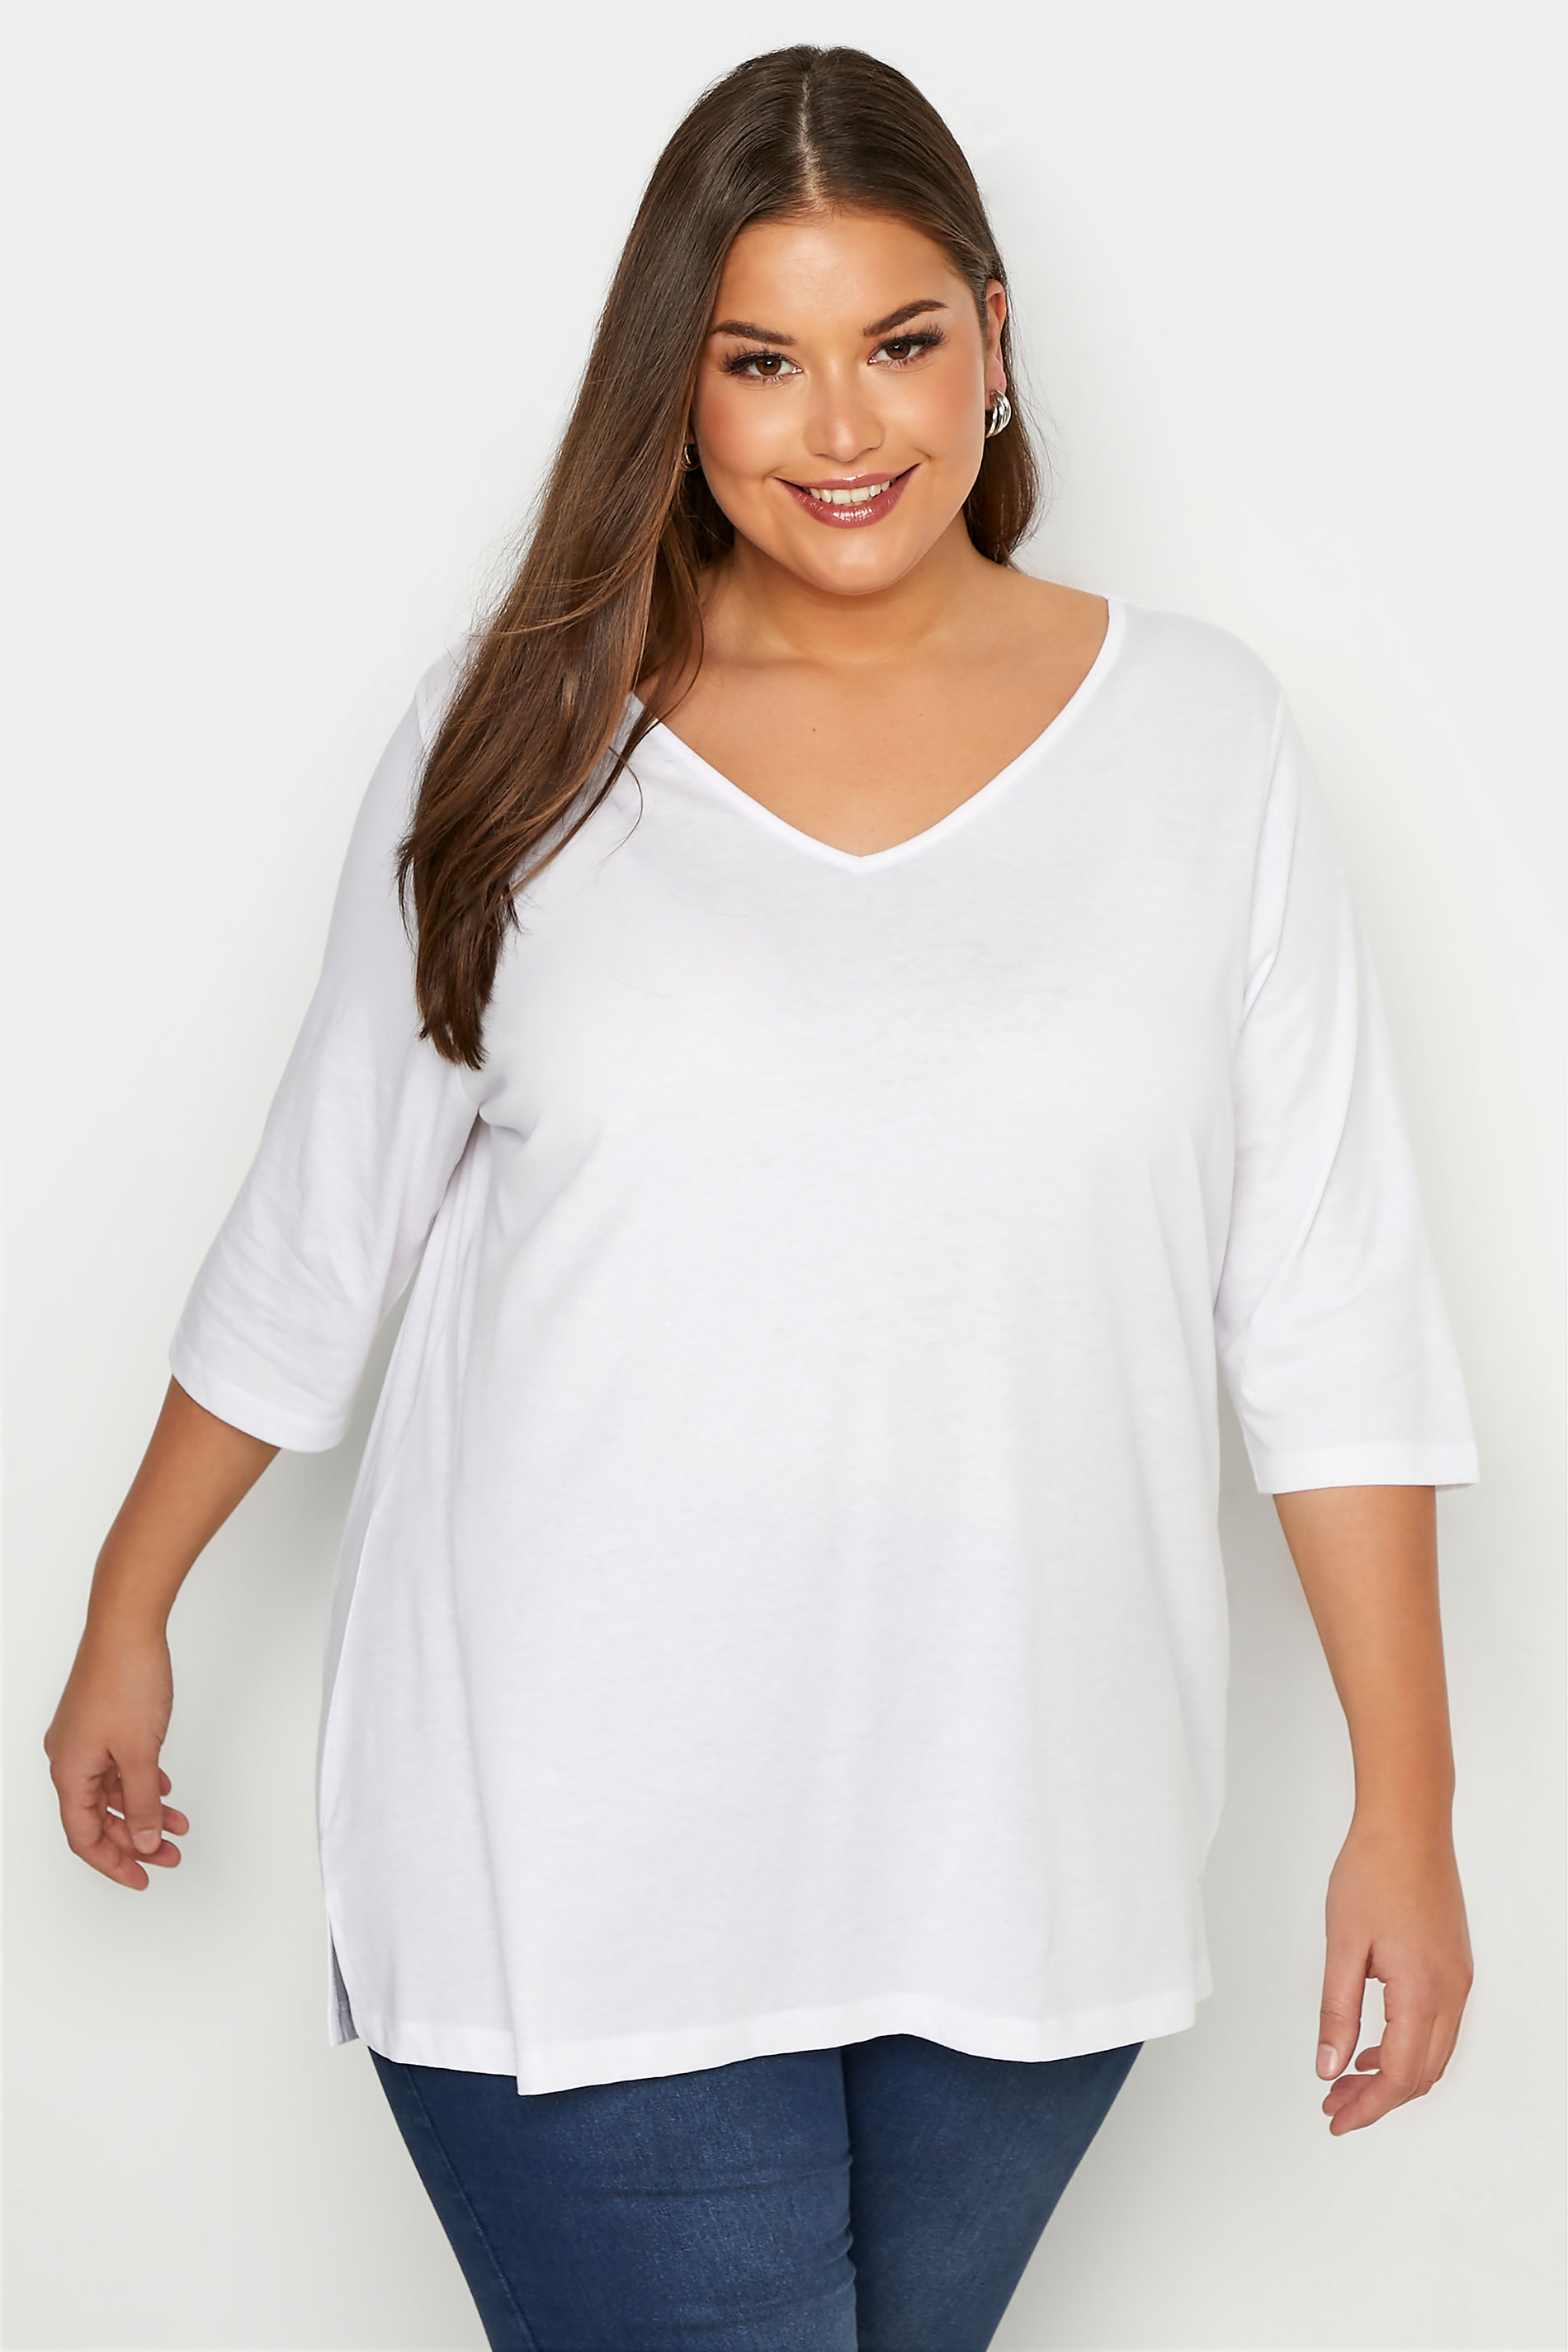 Grande taille  Tops Grande taille  T-Shirts | T-Shirt Blanc Col V Manches Longues - ZD79958